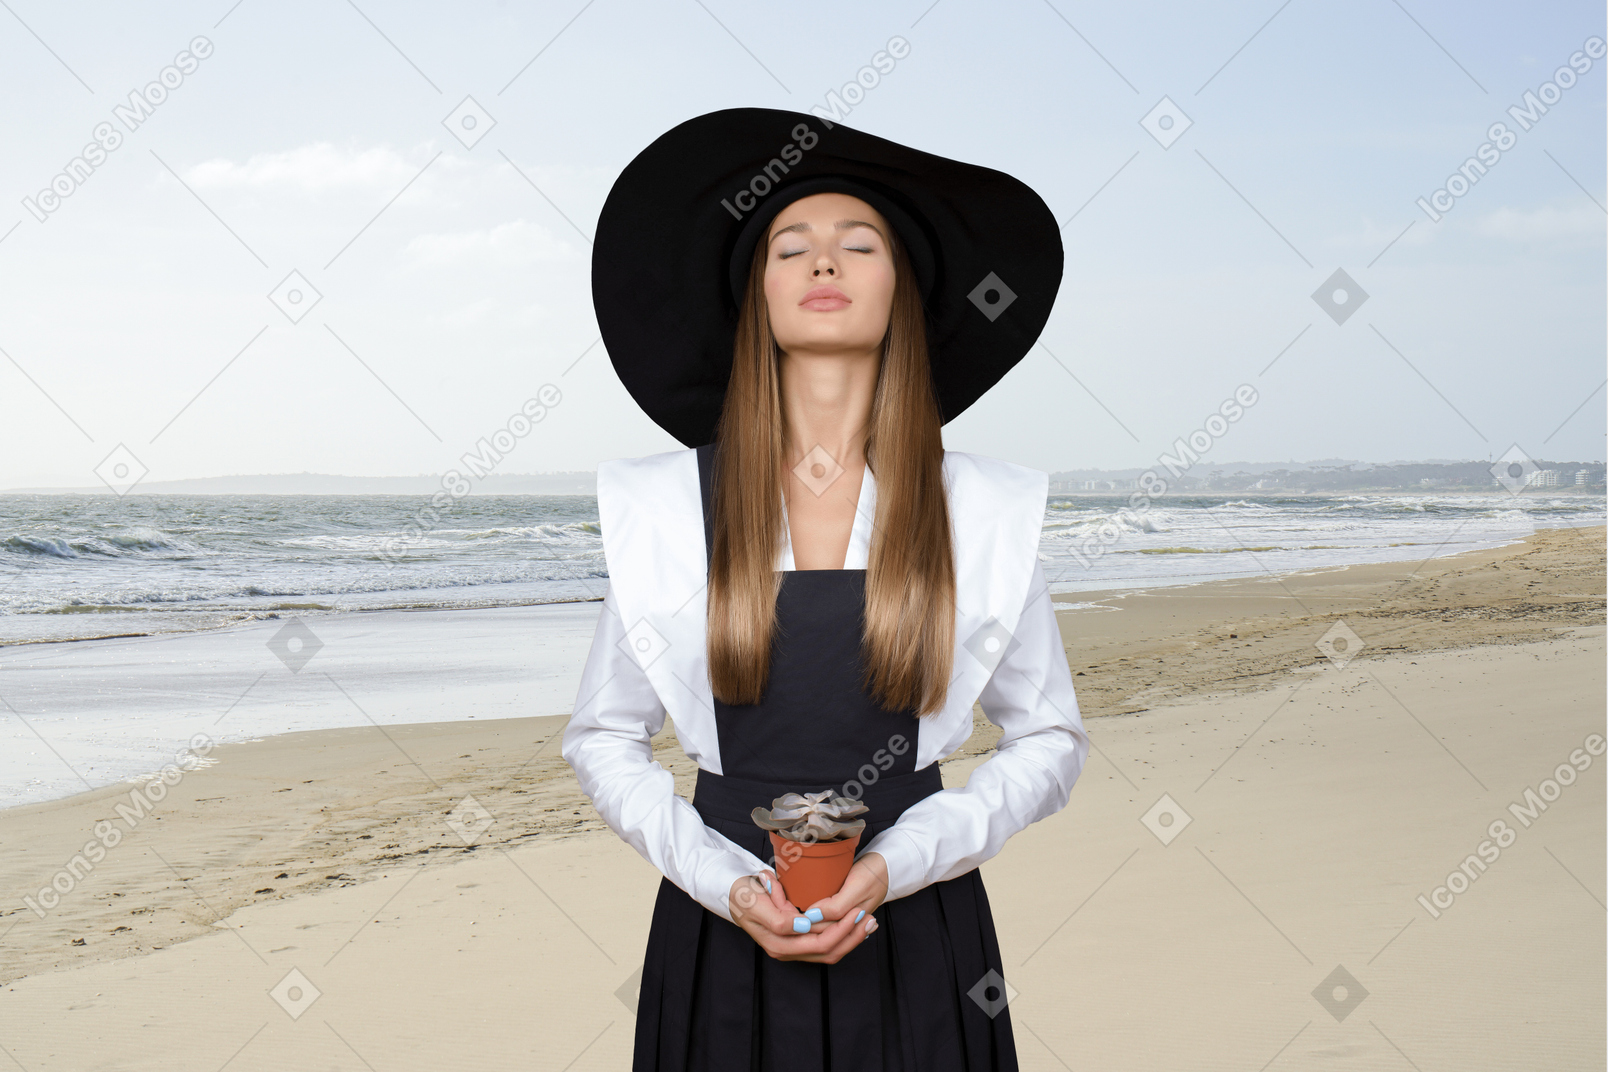 Woman with long hair wearing a black hat on the beach